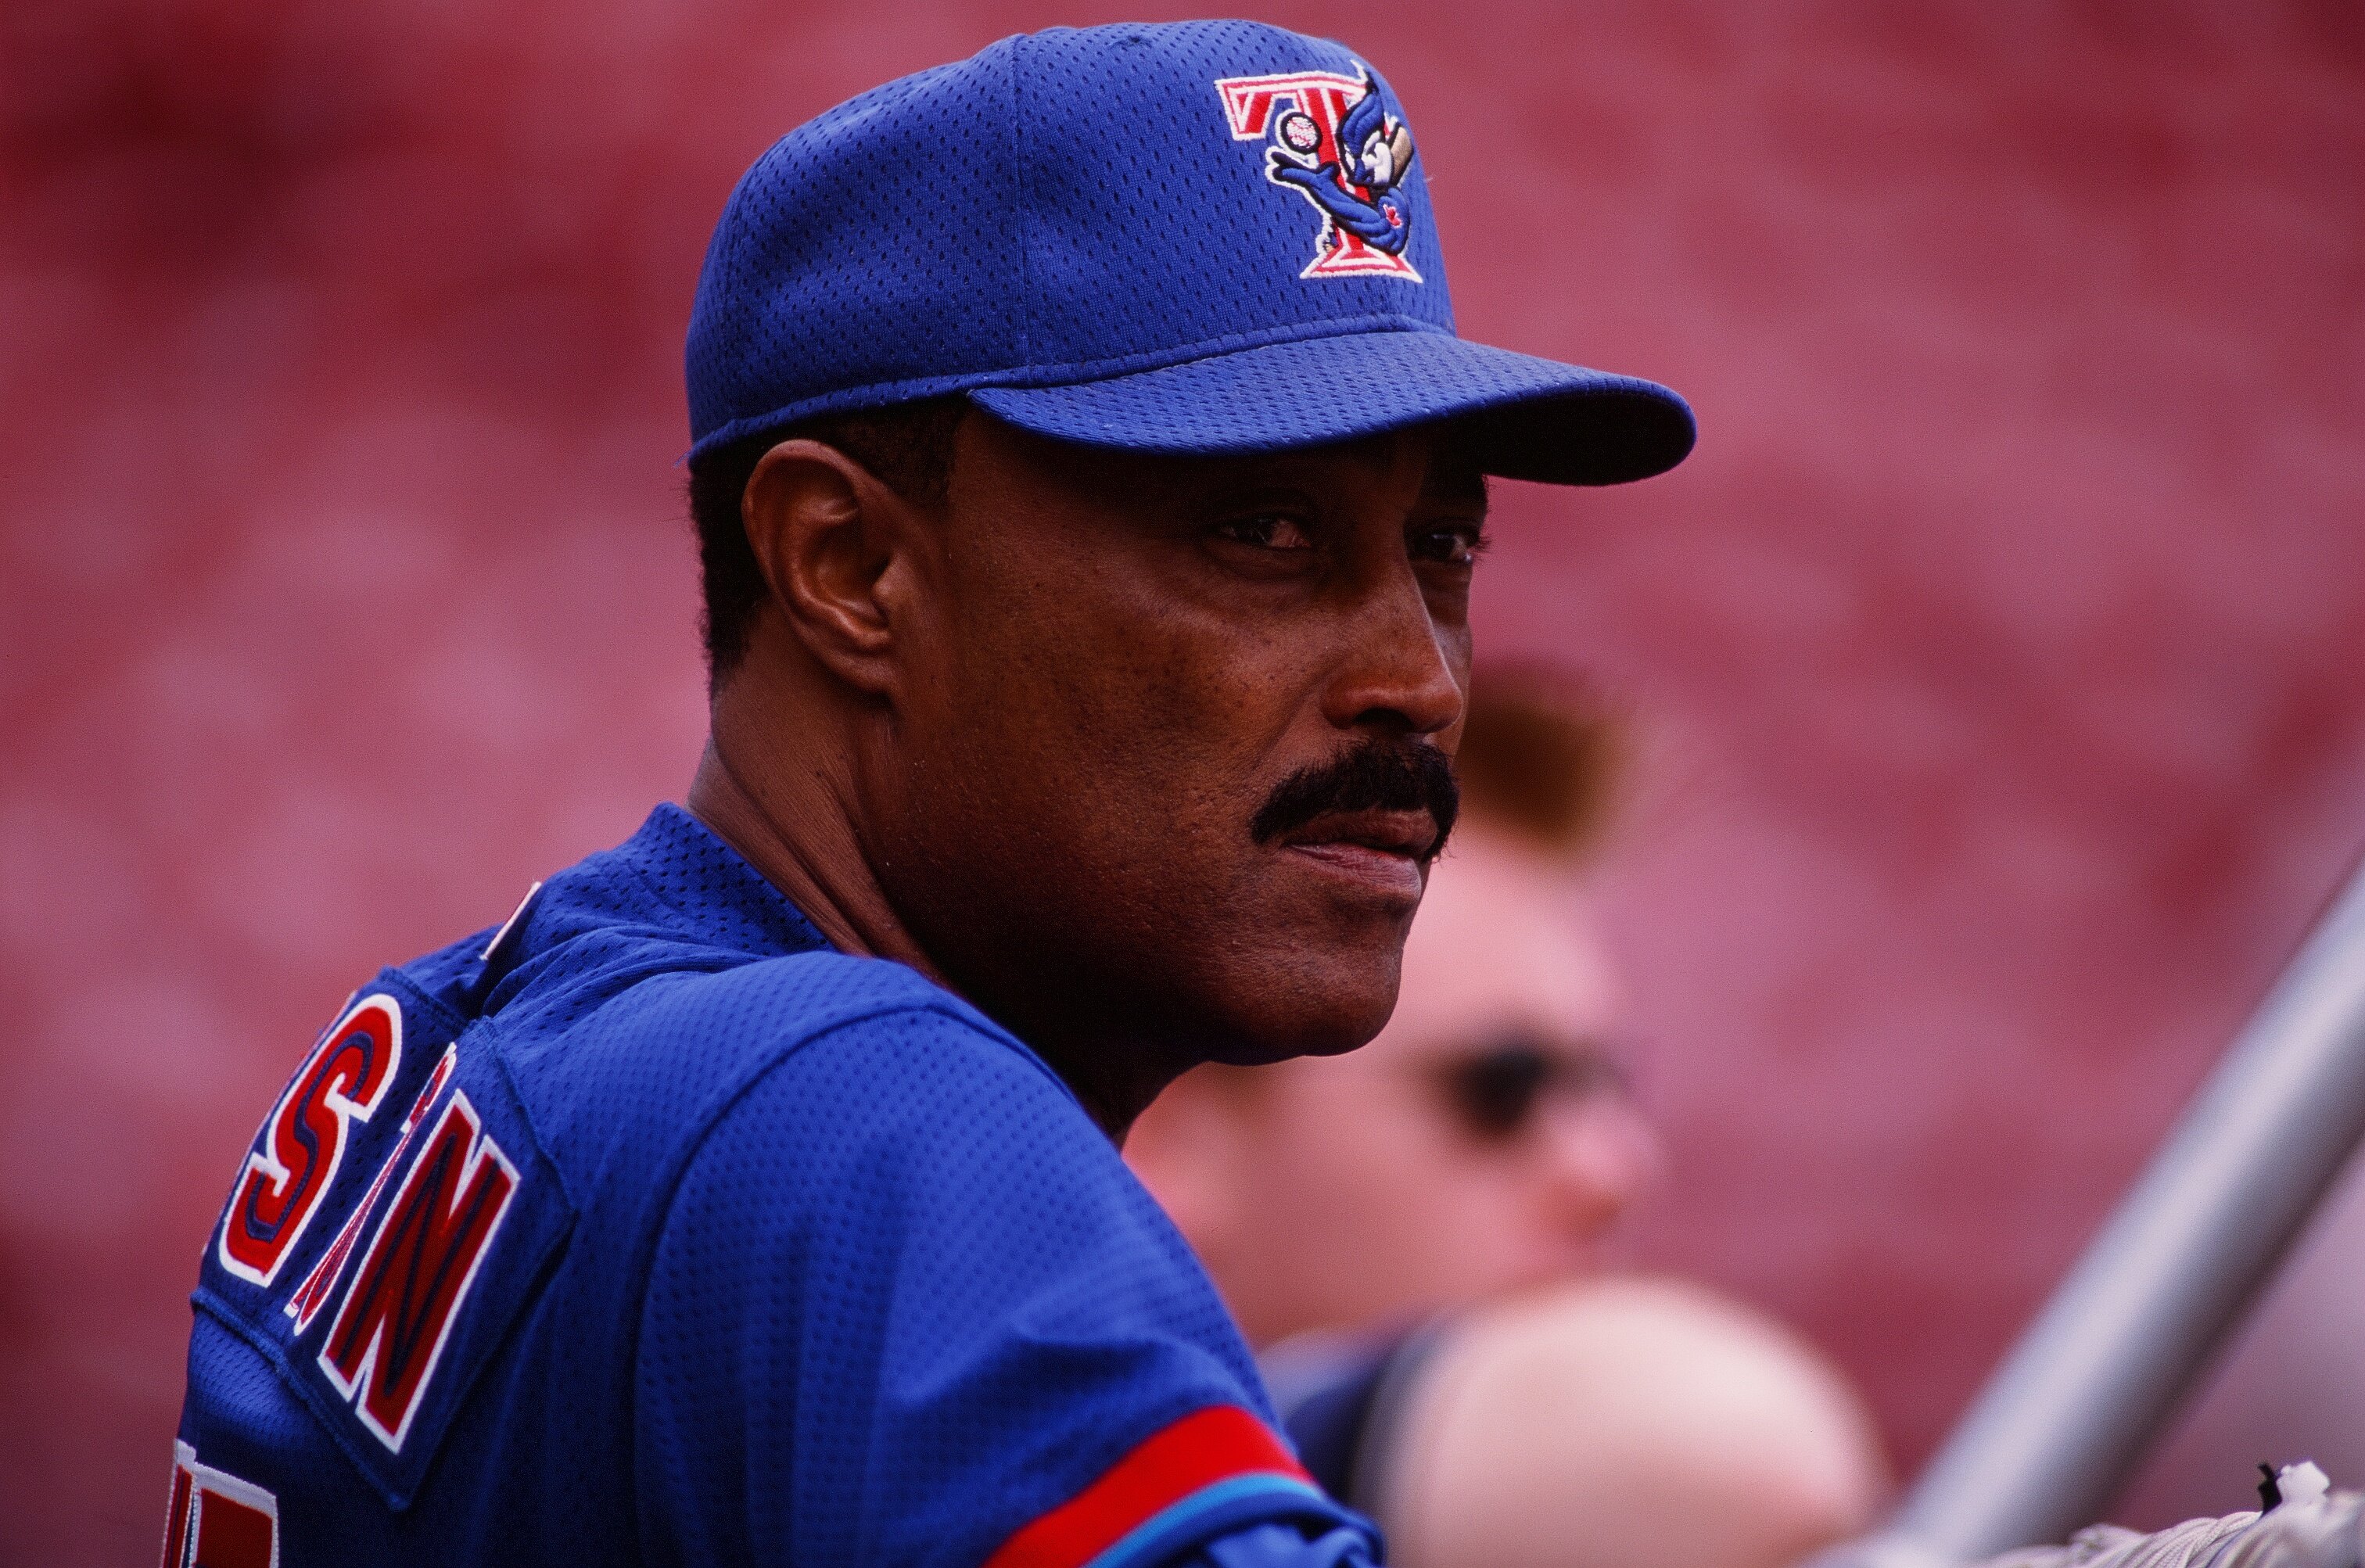 Are There Any Black General Managers in the MLB?